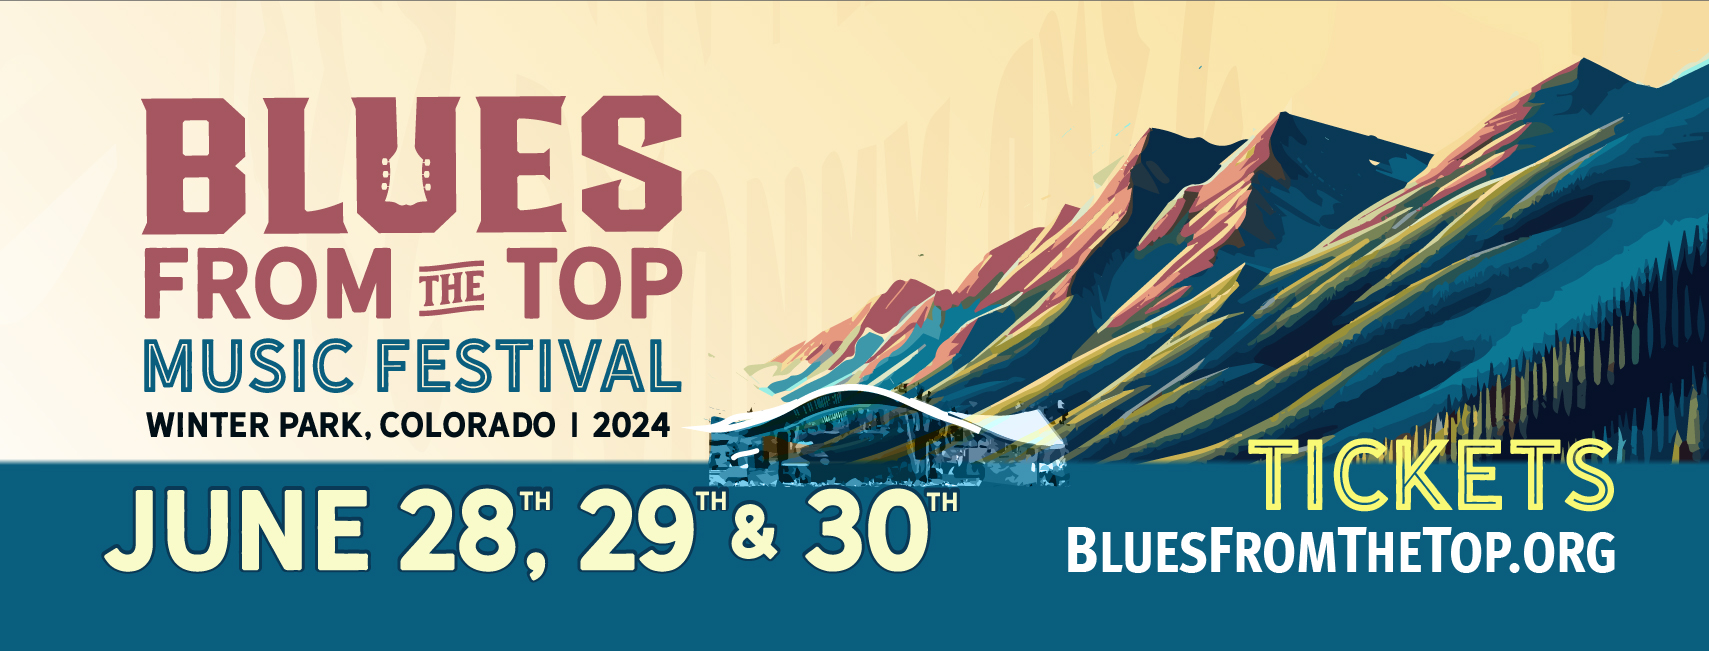 Blues From The Top Music Festival Winter Park Colorado 2024